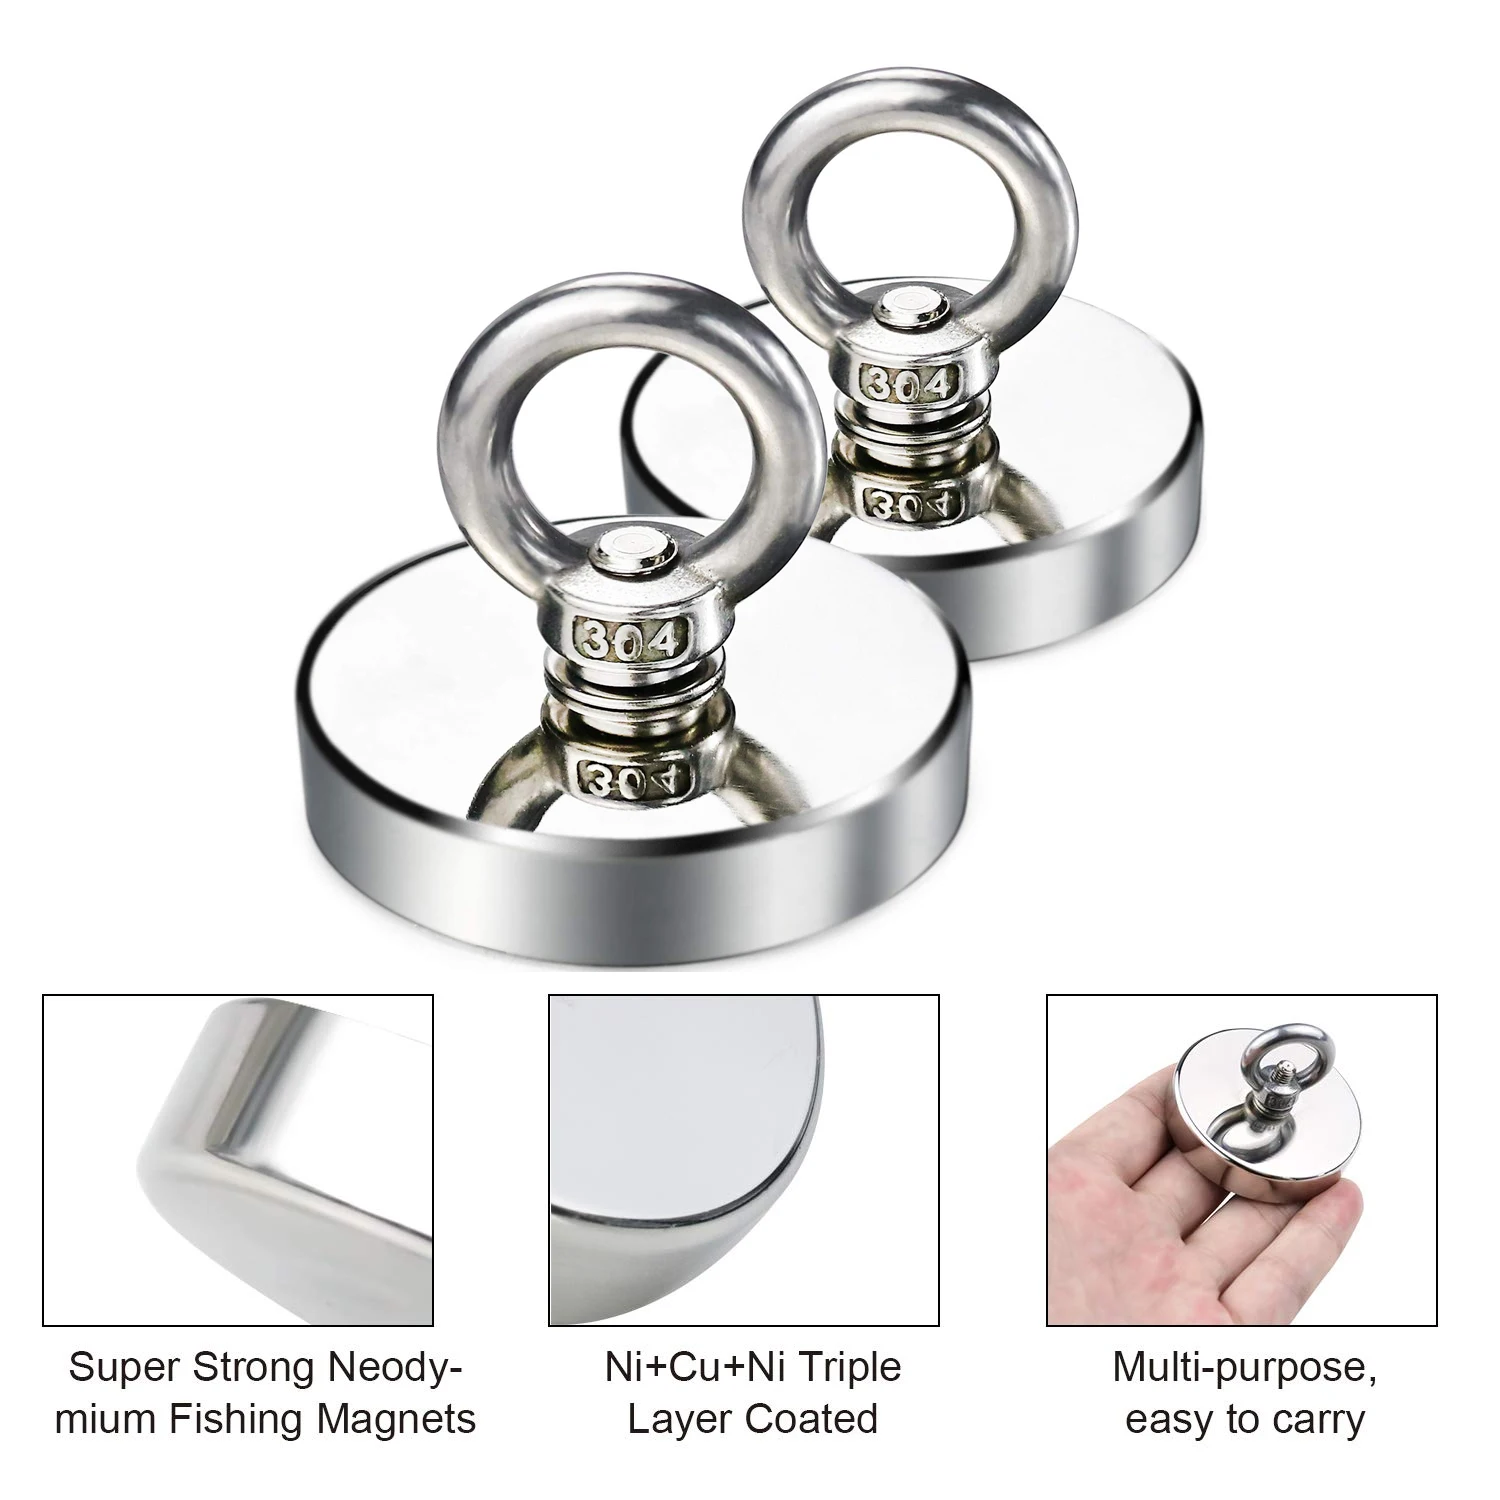 

Super Strong Neodymium Fishing Magnets Magnetic Hooks Salvage Magnets Neodymium Magnet Searcher Round Powerful Rare Earth Imanes